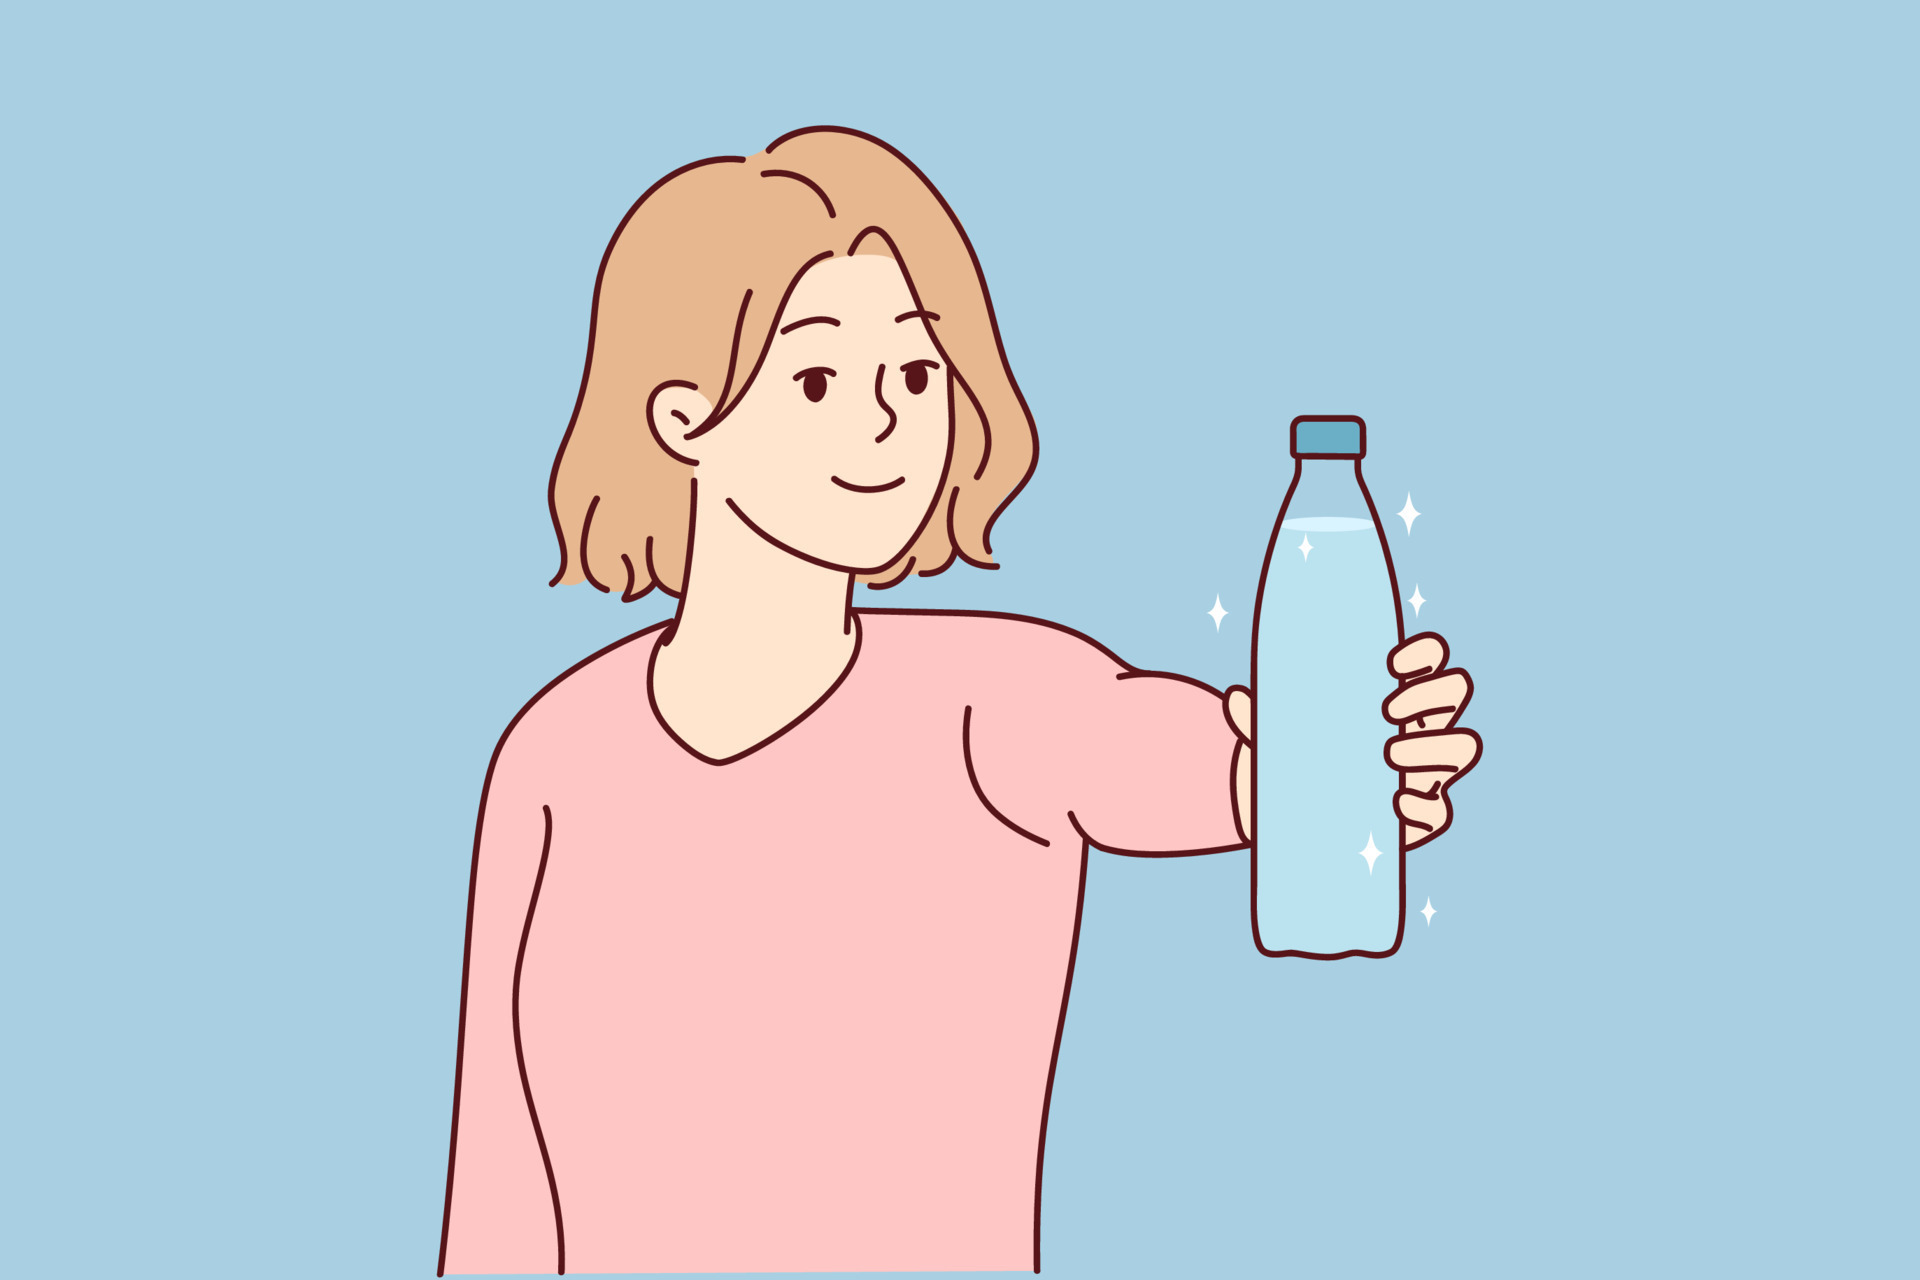 https://static.vecteezy.com/system/resources/previews/018/776/113/original/smiling-young-woman-hold-bottle-of-water-recommend-drinking-clear-clean-aqua-happy-female-make-recommendation-for-healthy-lifestyle-illustration-vector.jpg